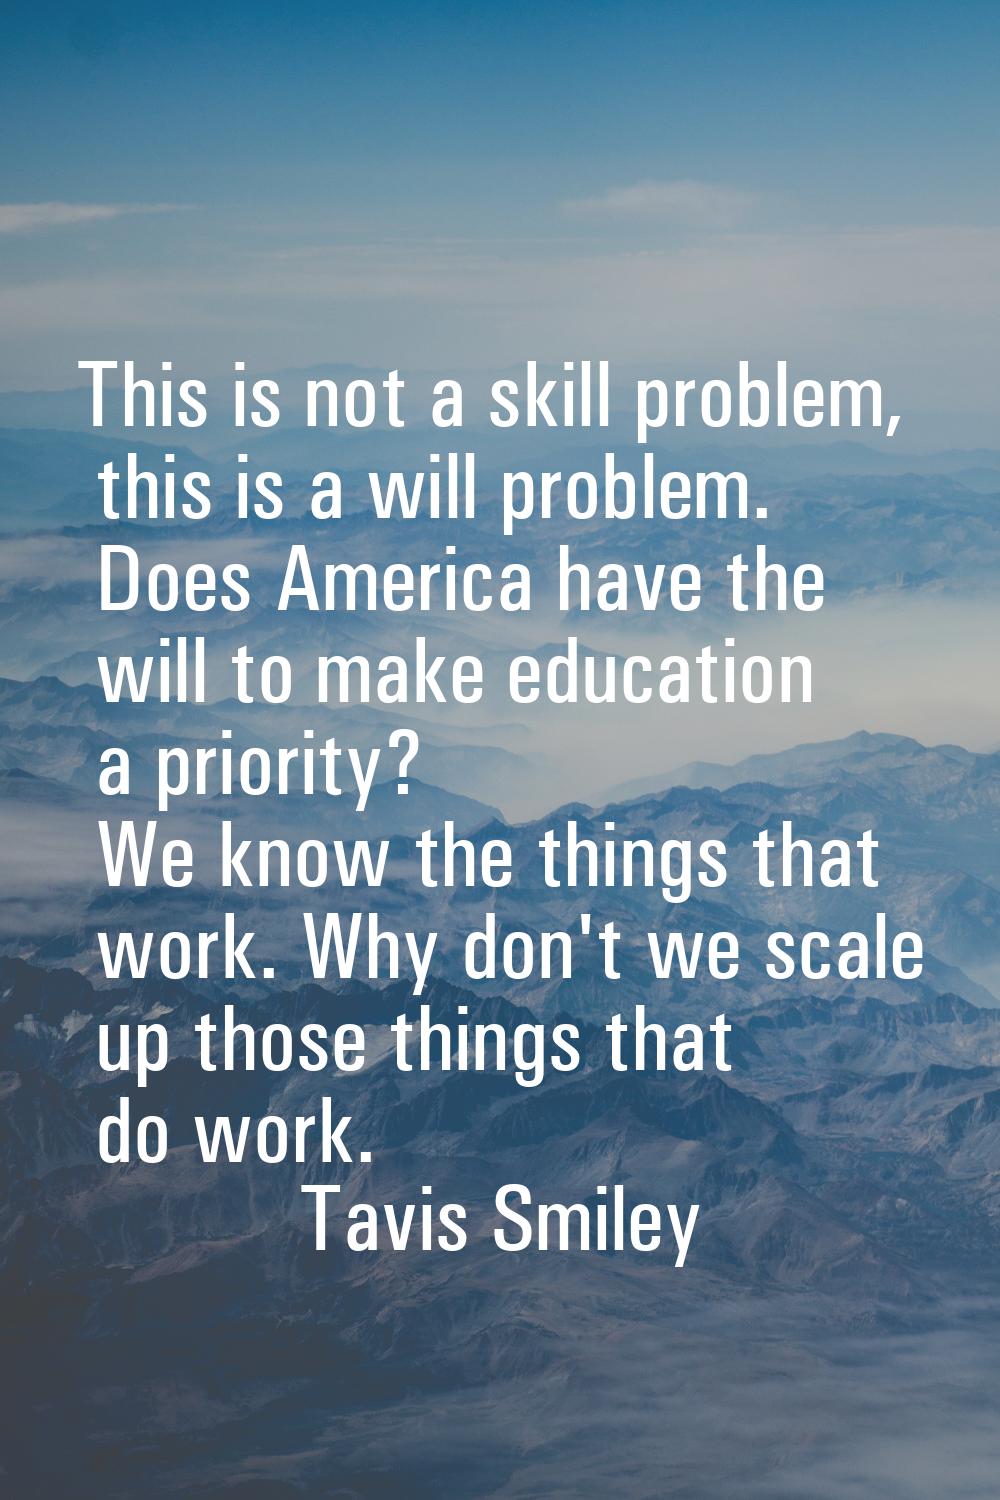 This is not a skill problem, this is a will problem. Does America have the will to make education a